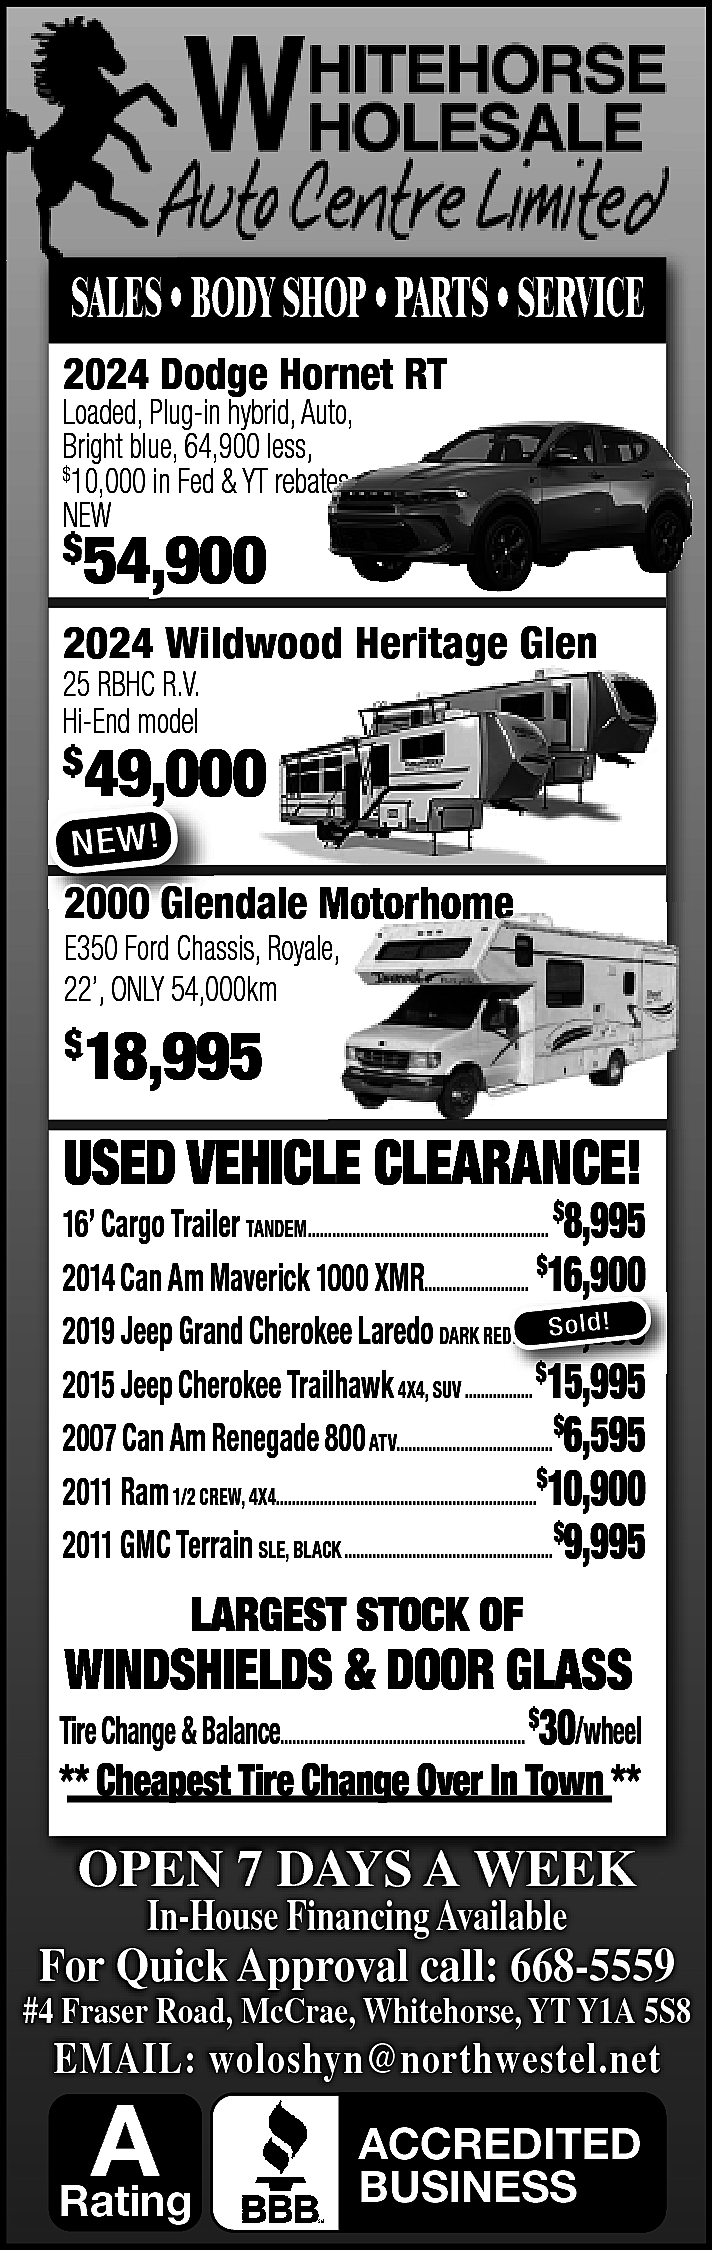 SALES • BODY SHOP •  SALES • BODY SHOP • PARTS • SERVICE  2024 Dodge Hornet RT    Loaded, Plug-in hybrid, Auto,  Bright blue, 64,900 less,  10,000 in Fed & YT rebates  NEW  $    $    54,900    2024 Wildwood Heritage Glen    25 RBHC R.V.  Hi-End model    $    49,000  ,    NE W !    2000 Glendale Motorhome  E350 Ford Chassis, Royale,  22’, ONLY 54,000km    18,995    $    USED VEHICLE CLEARANCE!    16’ Cargo Trailer TANDEM............................................................ $8,995  2014 Can Am Maverick 1000 XMR.......................... $16,900  ,  So ld!  2019 Jeep Grand Cherokee Laredo DARK REDD......$21,900  2015 Jeep Cherokee Trailhawk 4X4, SUV ................. $15,995  2007 Can Am Renegade 800 ATV.......................................$6,595  2011 Ram 1/2 CREW, 4X4.................................................................$10,900  2011 GMC Terrain SLE, BLACK ....................................................$9,995    LARGEST STOCK OF    WINDSHIELDS & DOOR GLASS    Tire Change & Balance............................................................. $30/wheel    ** Cheapest Tire Change Over In Town **    OPEN 7 DAYS A WEEK  In-House Financing Available    For Quick Approval call: 668-5559    #4 Fraser Road, McCrae, Whitehorse, YT Y1A 5S8    EMAIL: woloshyn@northwestel.net    A    Rating    ACCREDITED  BUSINESS    